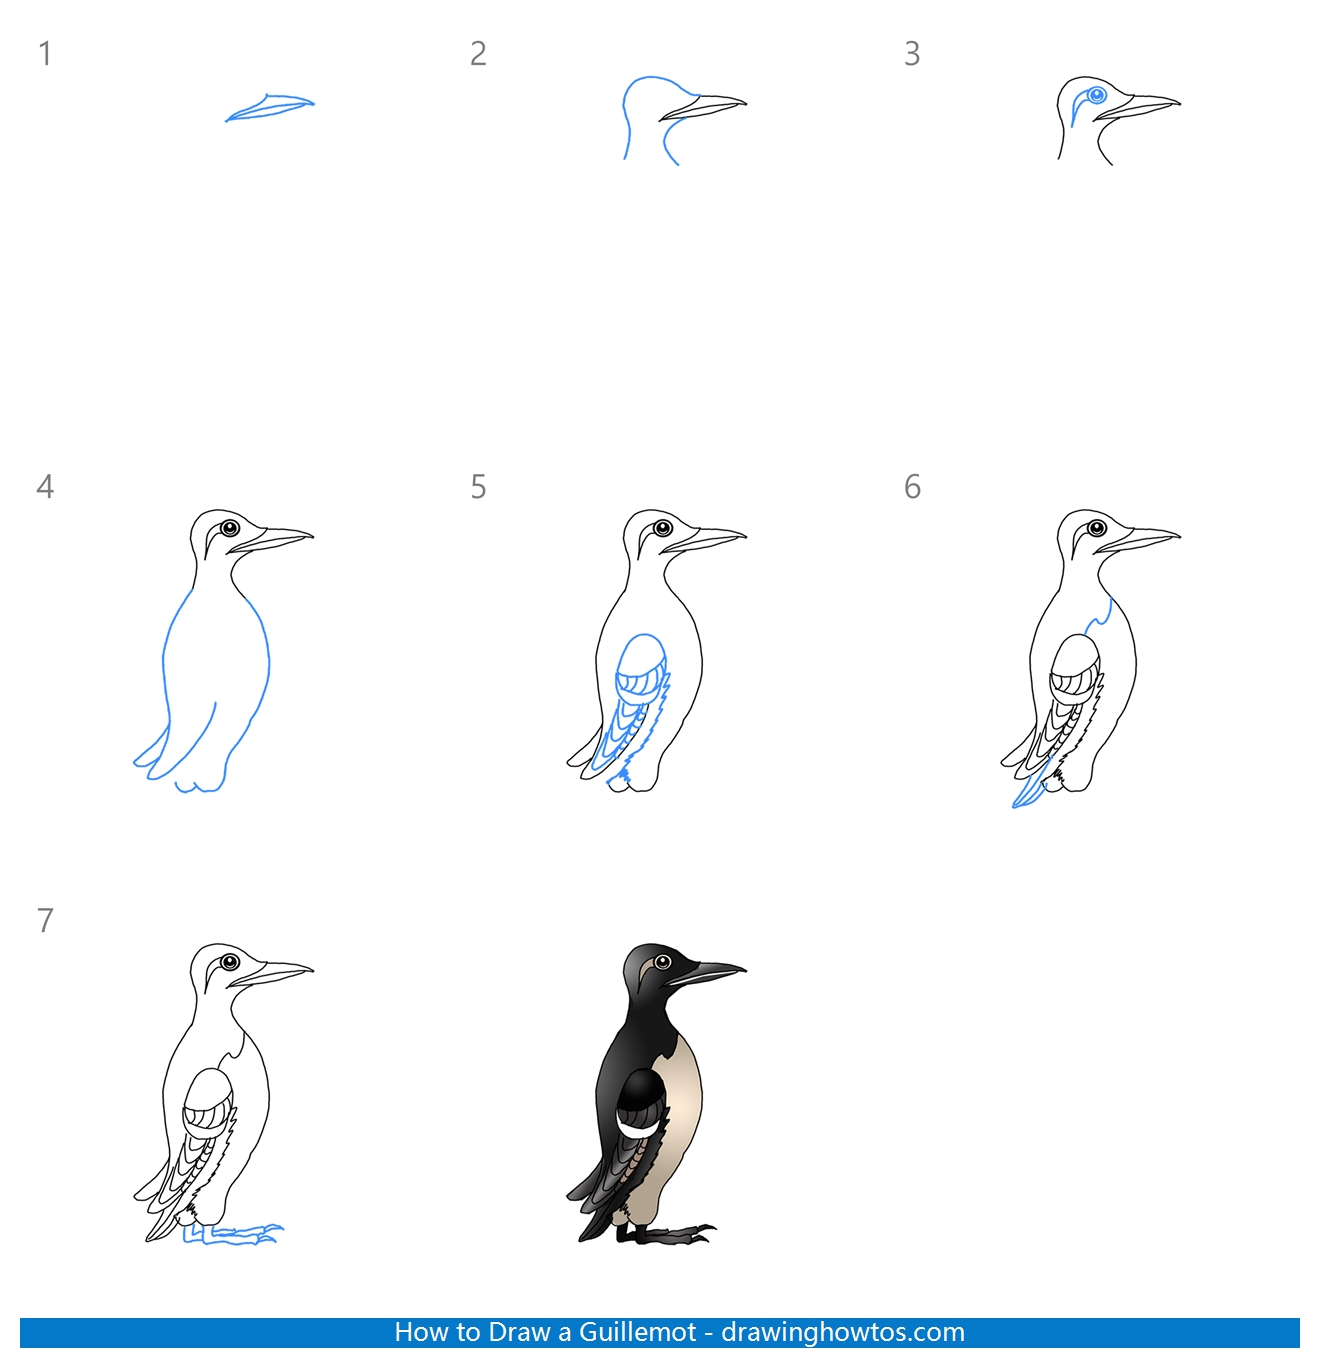 How to Draw a Guillemot Step by Step